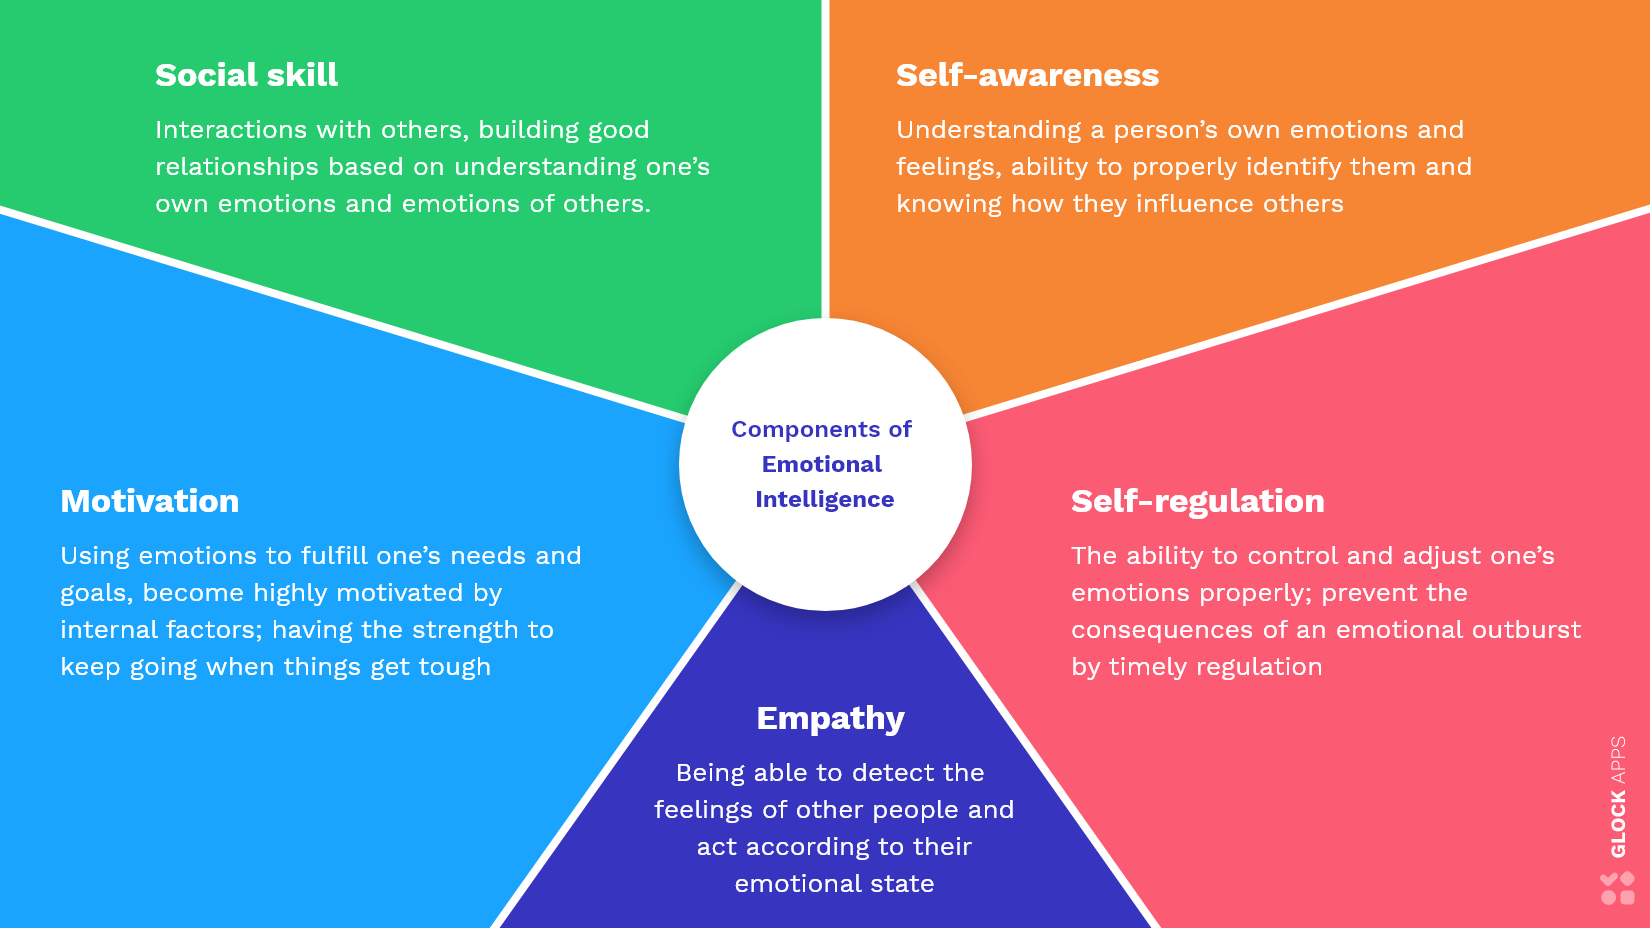 Five elements that compose the core of Emotional Intelligence